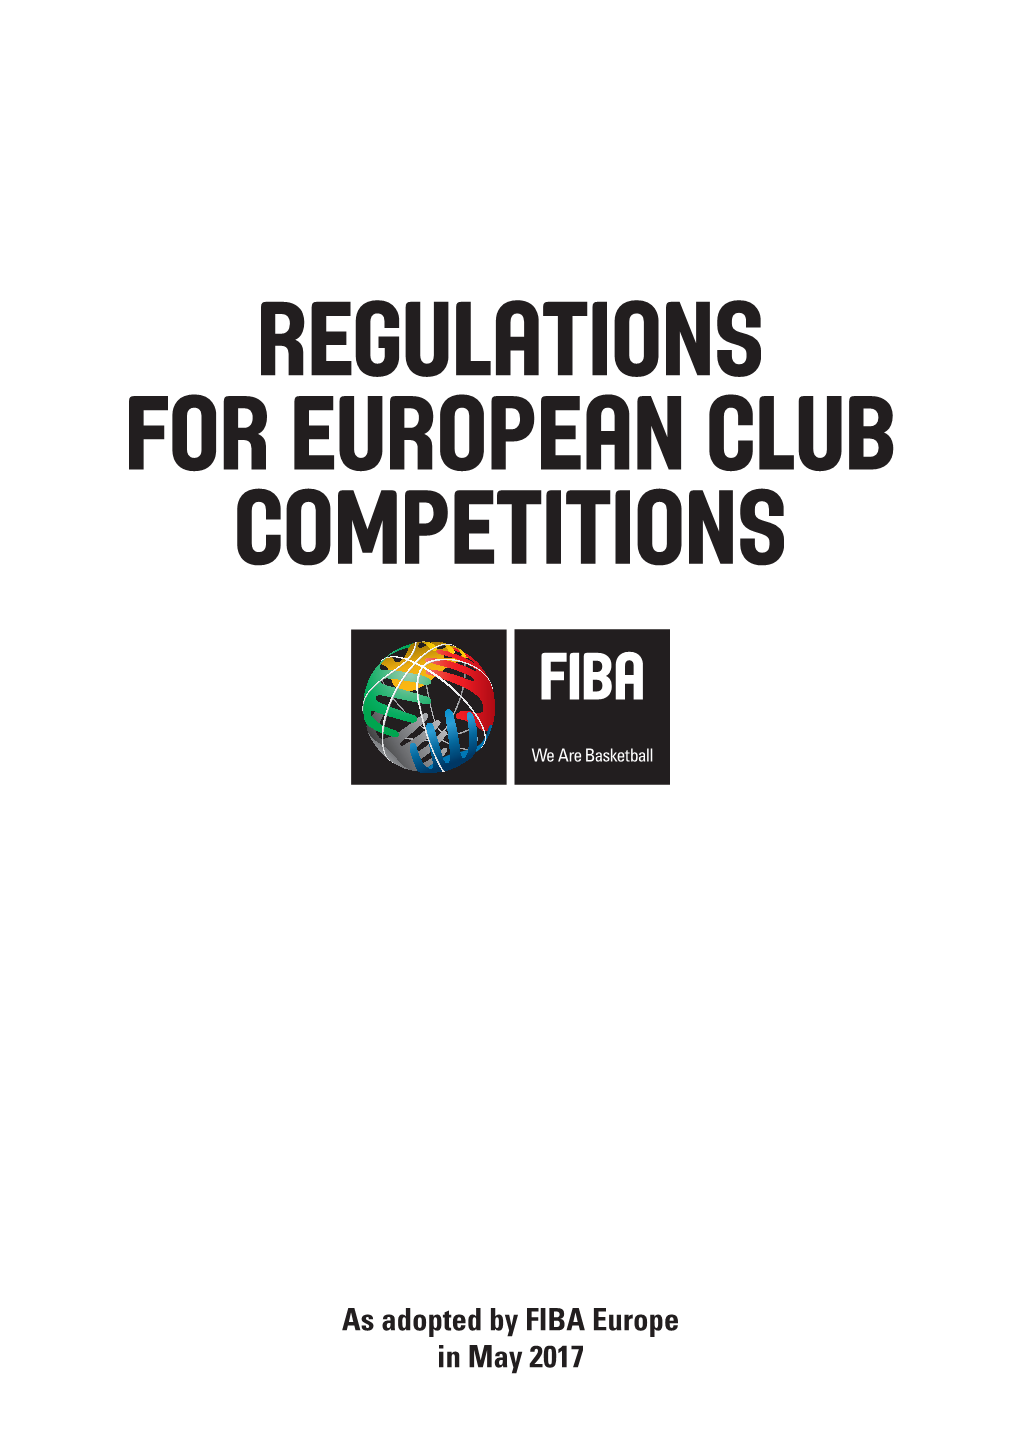 Regulations for European Club Competitions